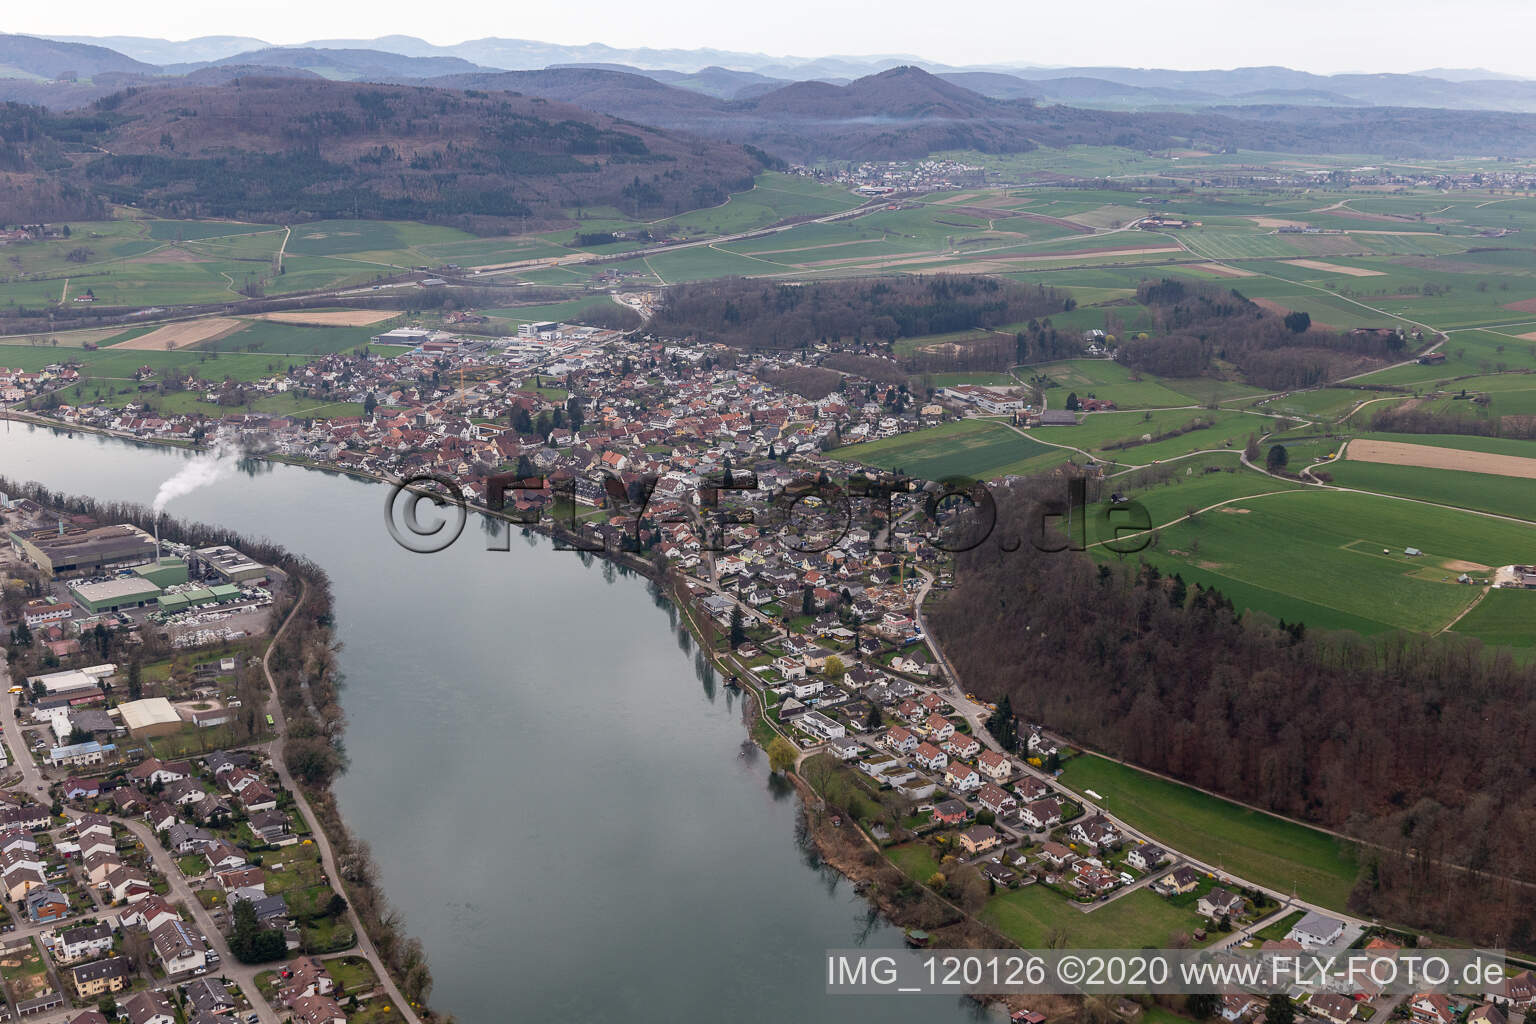 Village on the river bank areas in Wallbach in the canton Aargau, Switzerland